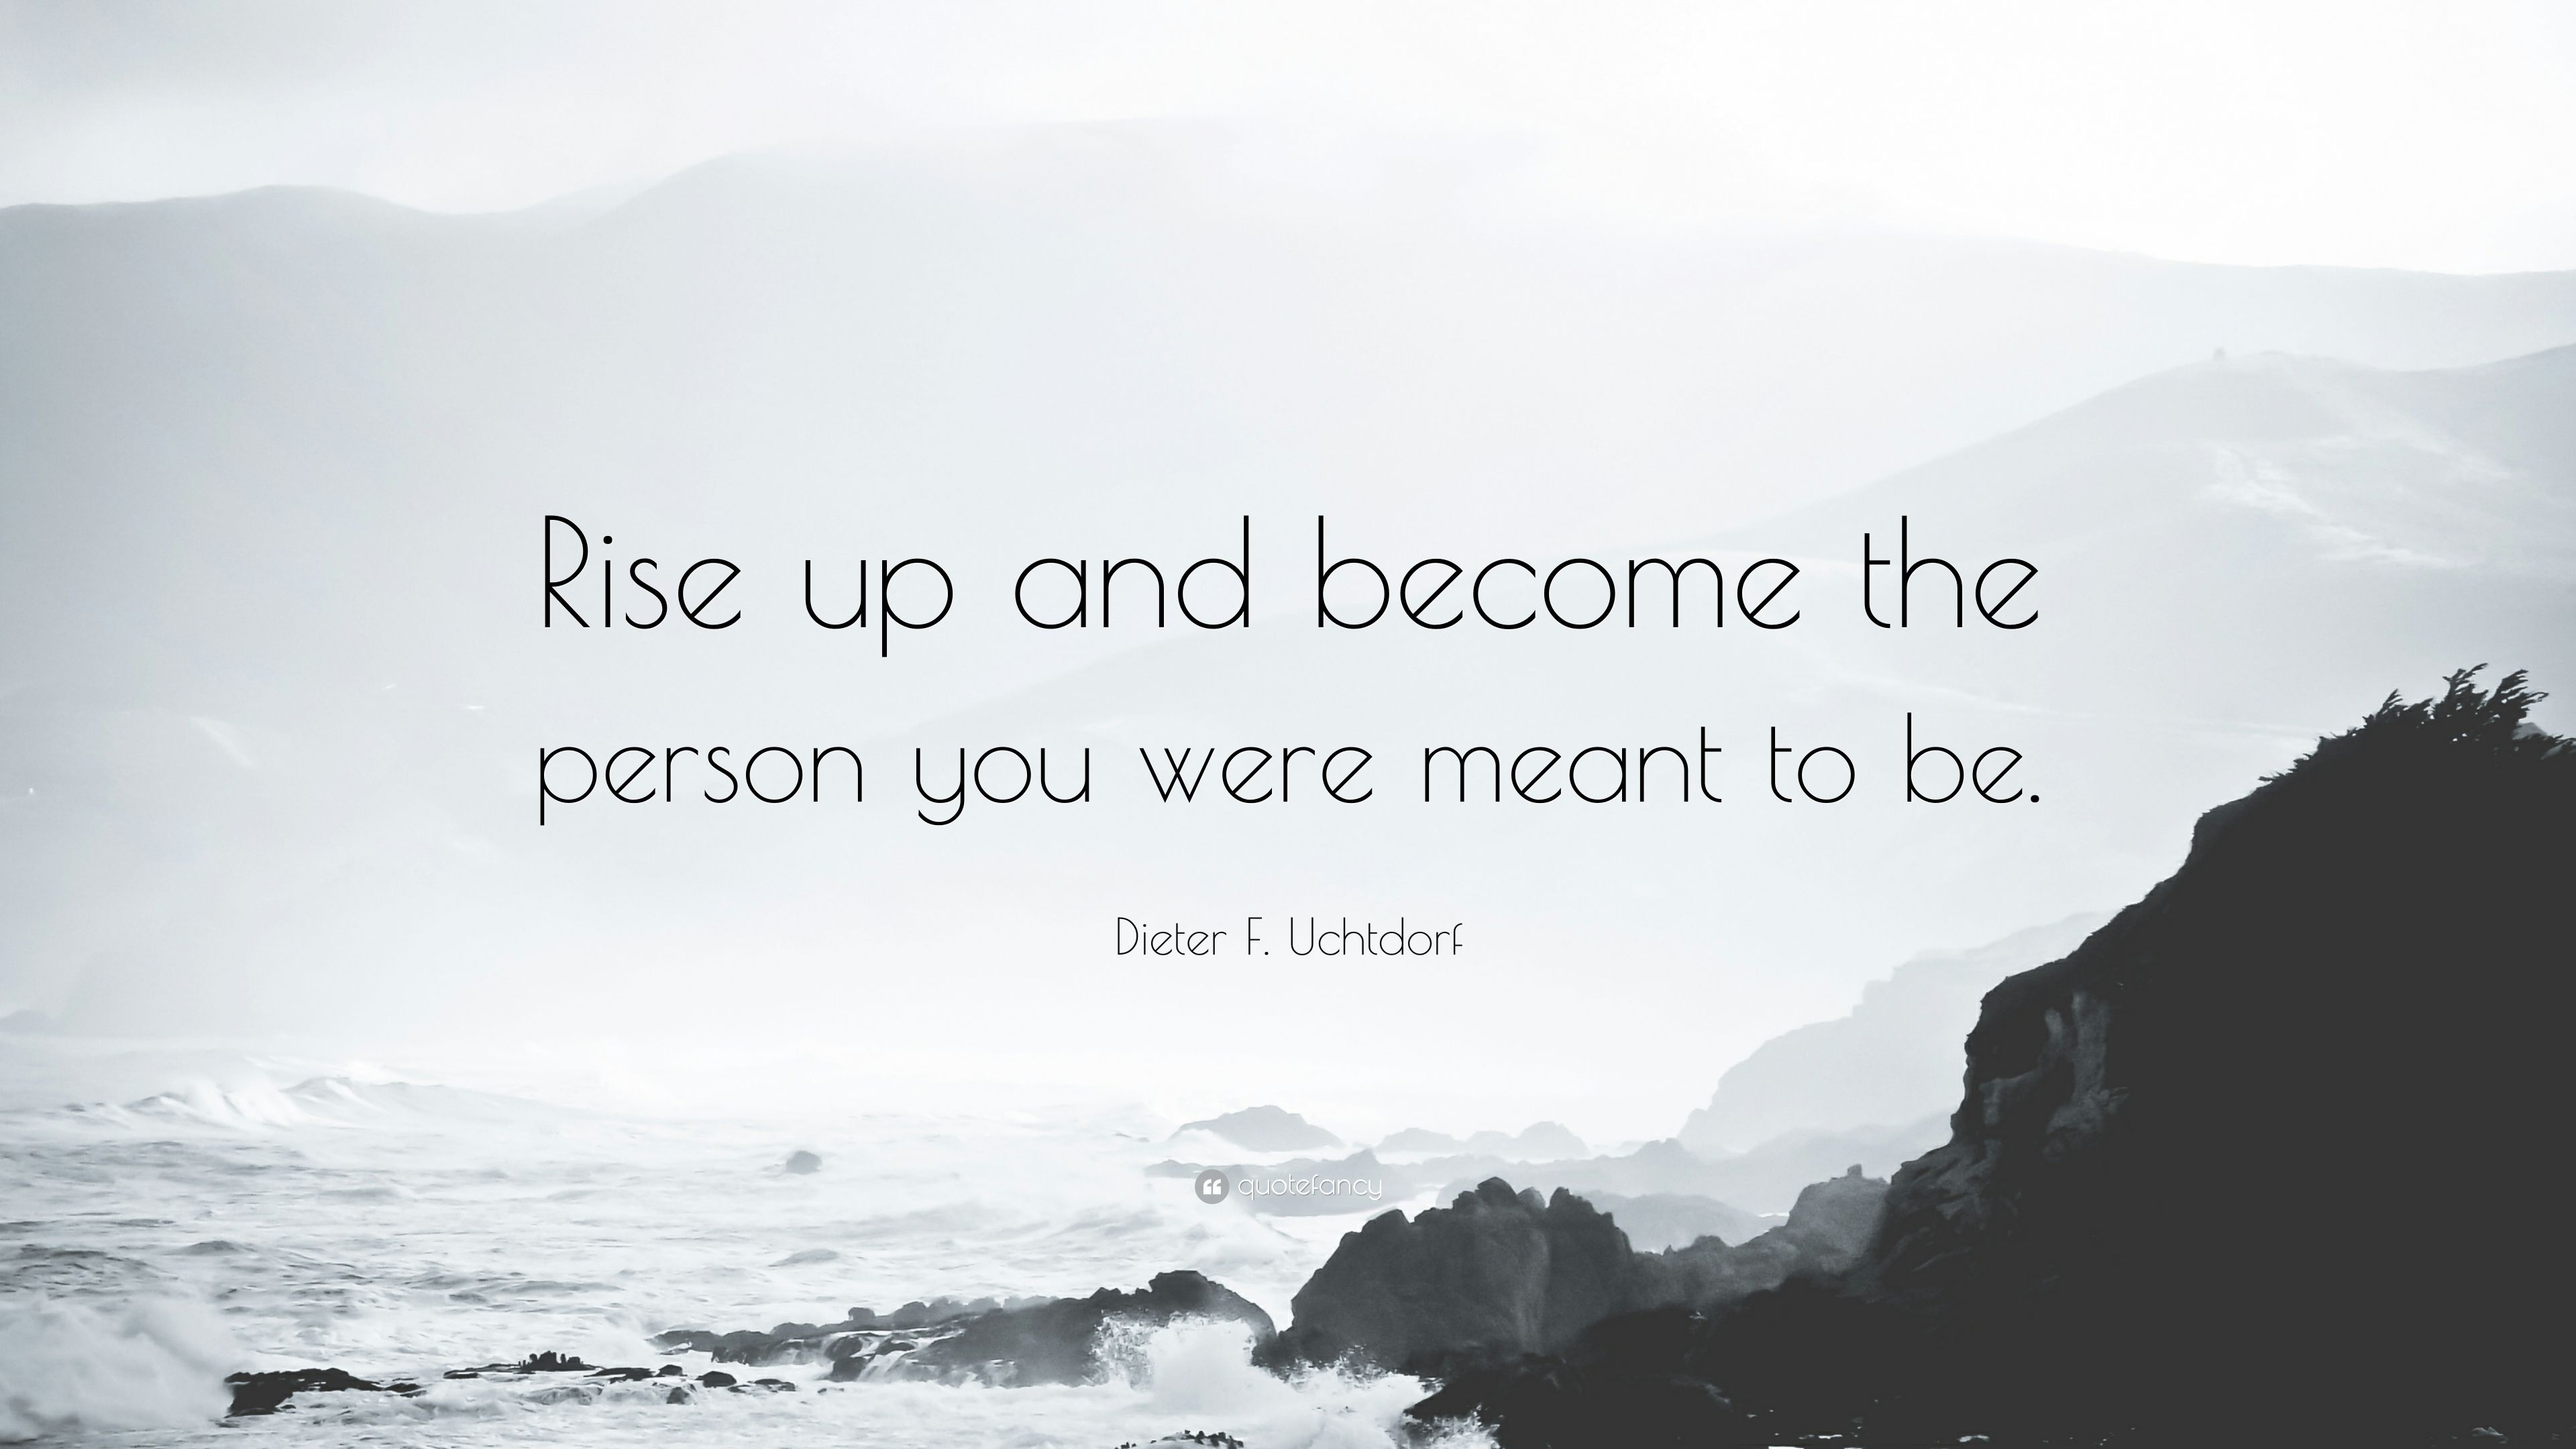 Dieter F. Uchtdorf Quote: “Rise up and become the person you were meant to be.” (12 wallpaper)